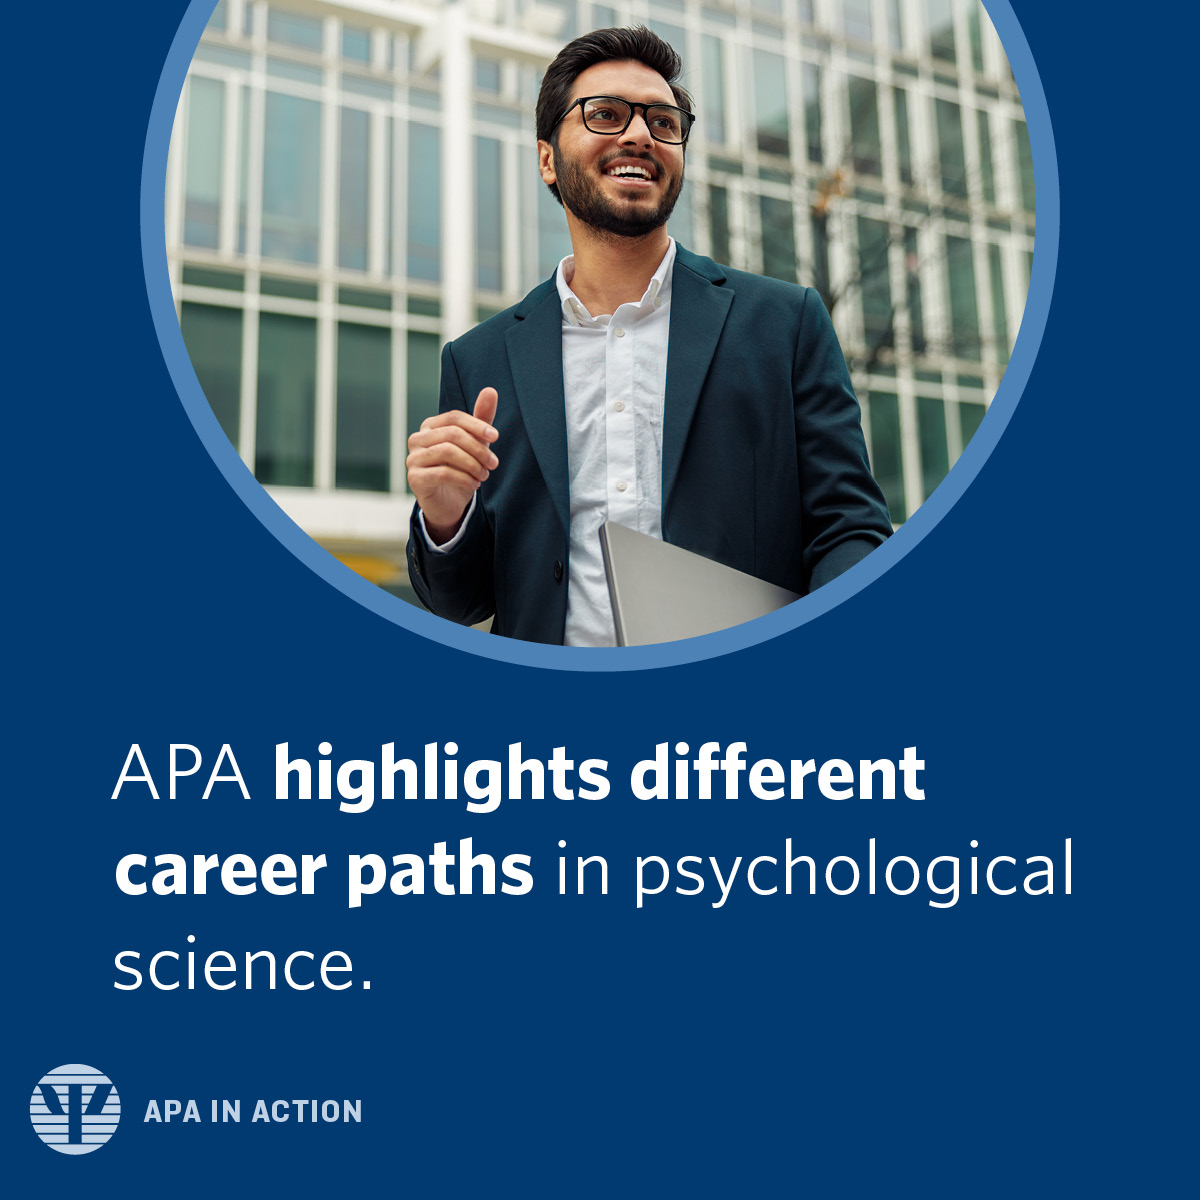 Did you know? APA offers several resources—including the video series “How Did You Get That Job?”—to show students the different professional pathways available in psychological science. Learn more: at.apa.org/ukx #psychology #science #students #career